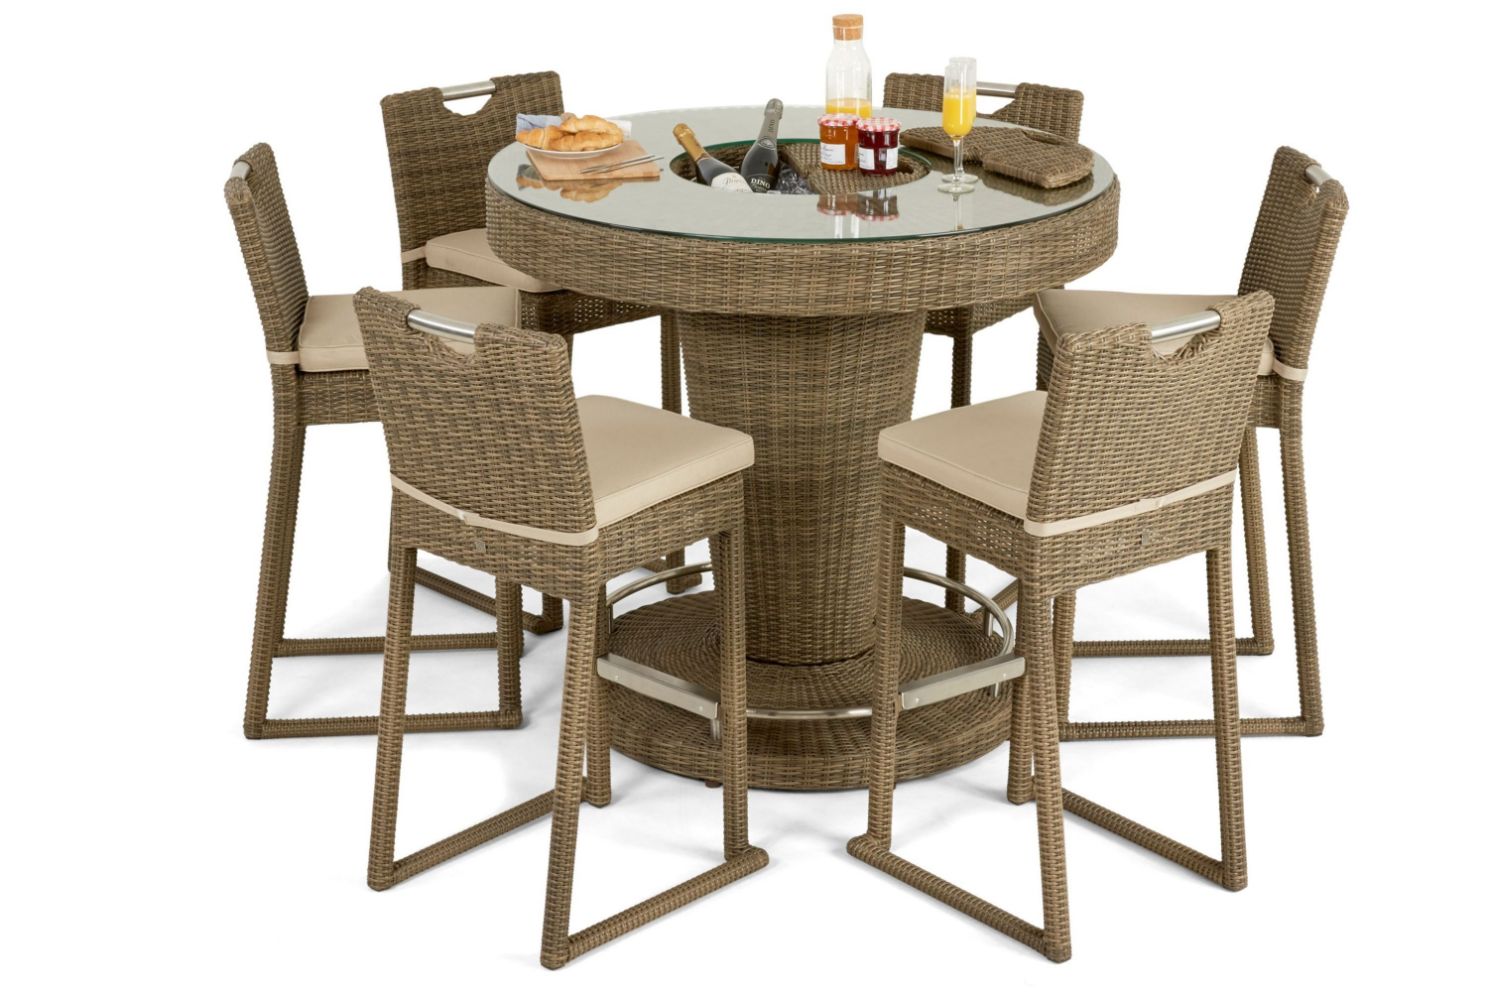 Brand New Rattan Garden Furniture: Exclusive Range Including Dining Sets, Sofa Sets, Sun Loungers and More